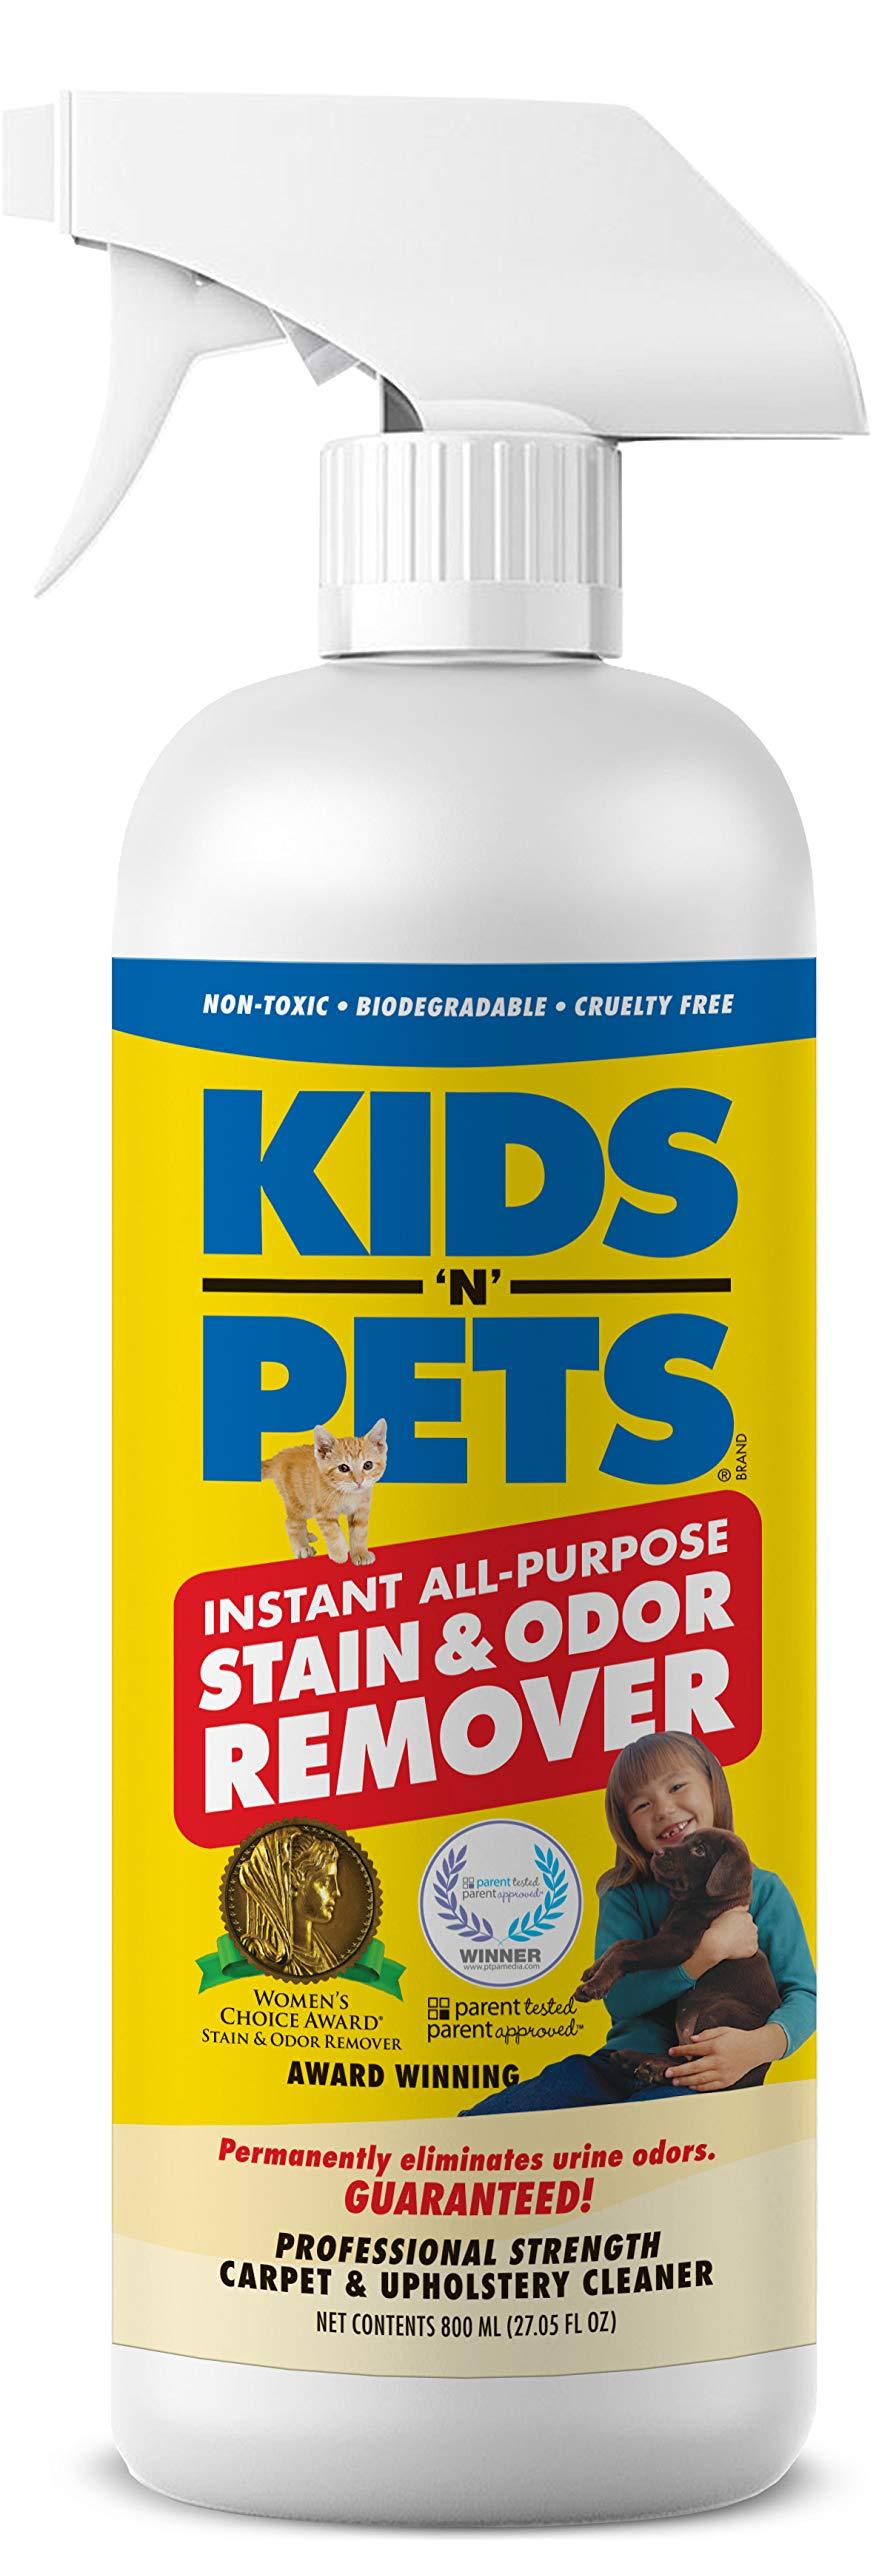 [Australia] - KIDS 'N' PETS Instant All-purpose Stain & Odor Remover – 27.05 oz. - (800 ml) | Proprietary Formula Permanently Eliminates Tough Stains & Odors – Even Urine Odors | Non-Toxic & Child Safe 1 